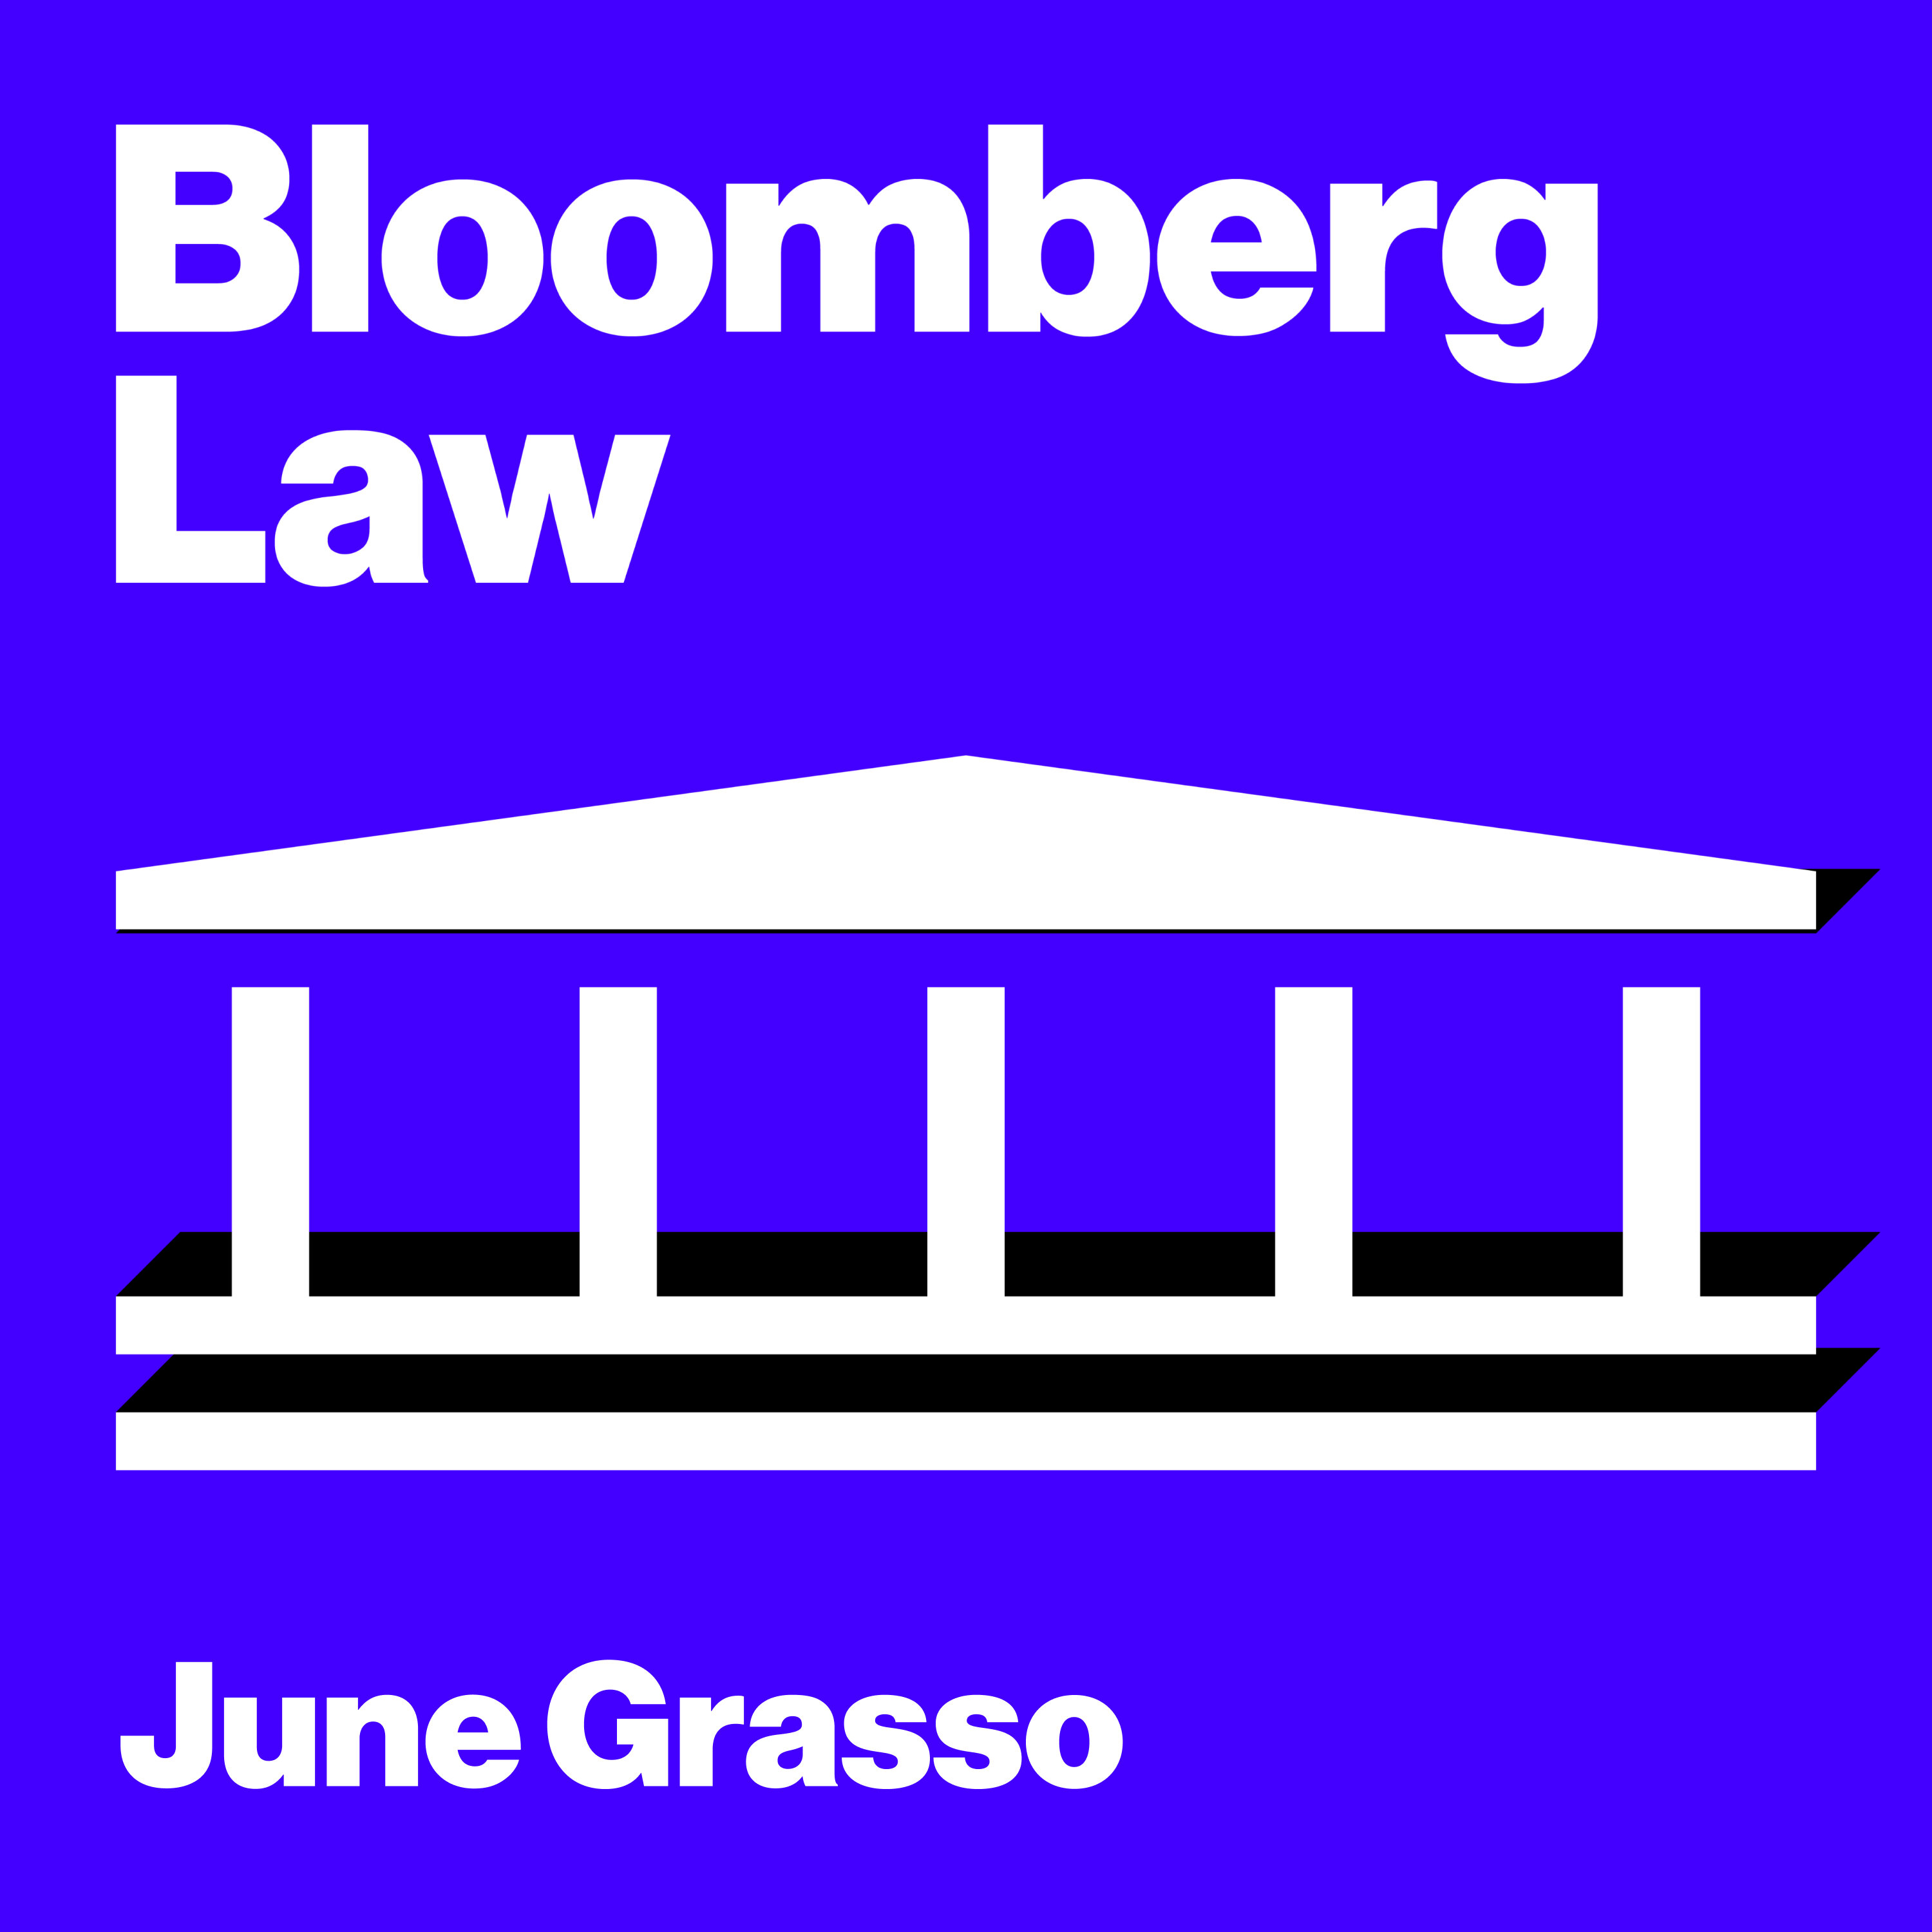 New Jersey awards New York its Walking Papers – Bloomberg Law

End-shutdown